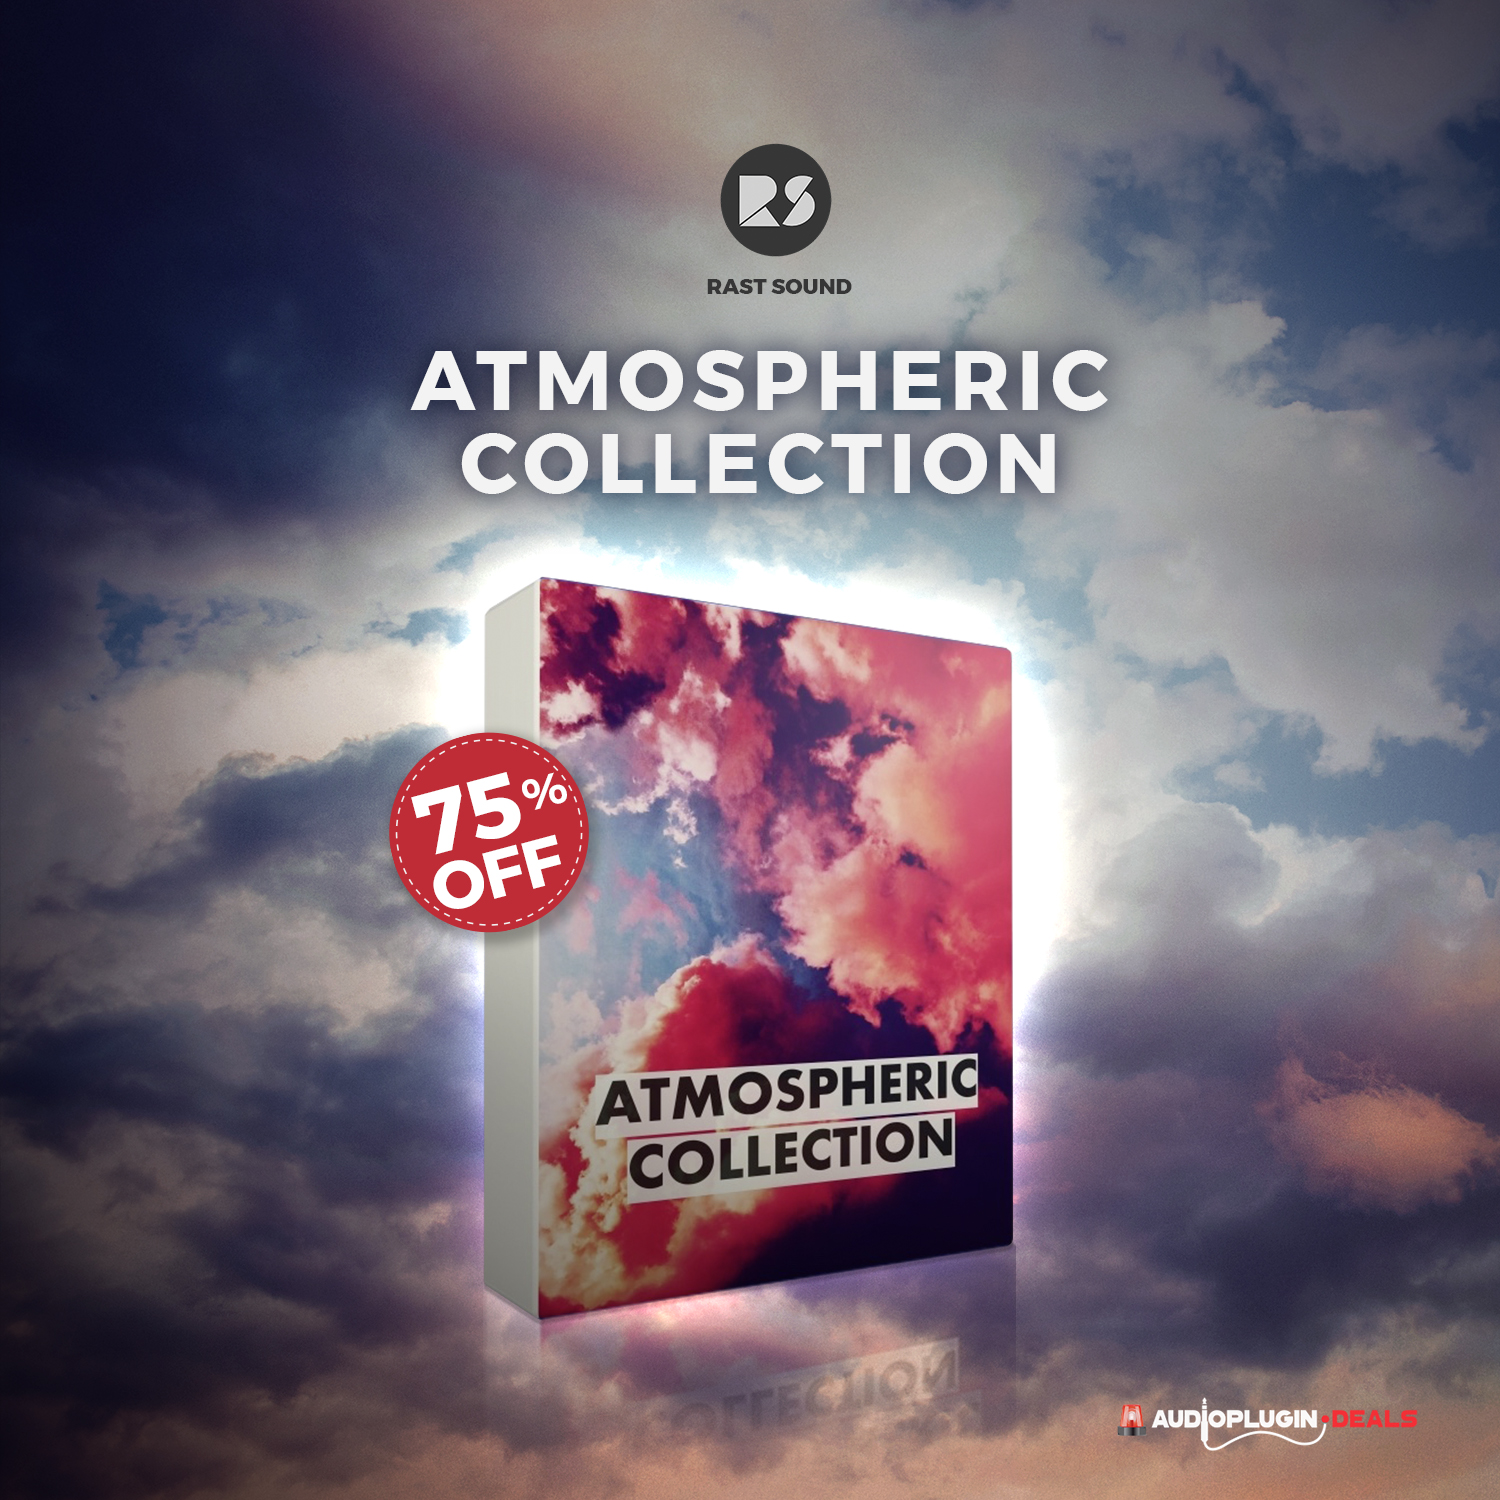 For just $59 (instead of $224), get the Atmospheric Collection from Rast Sound!